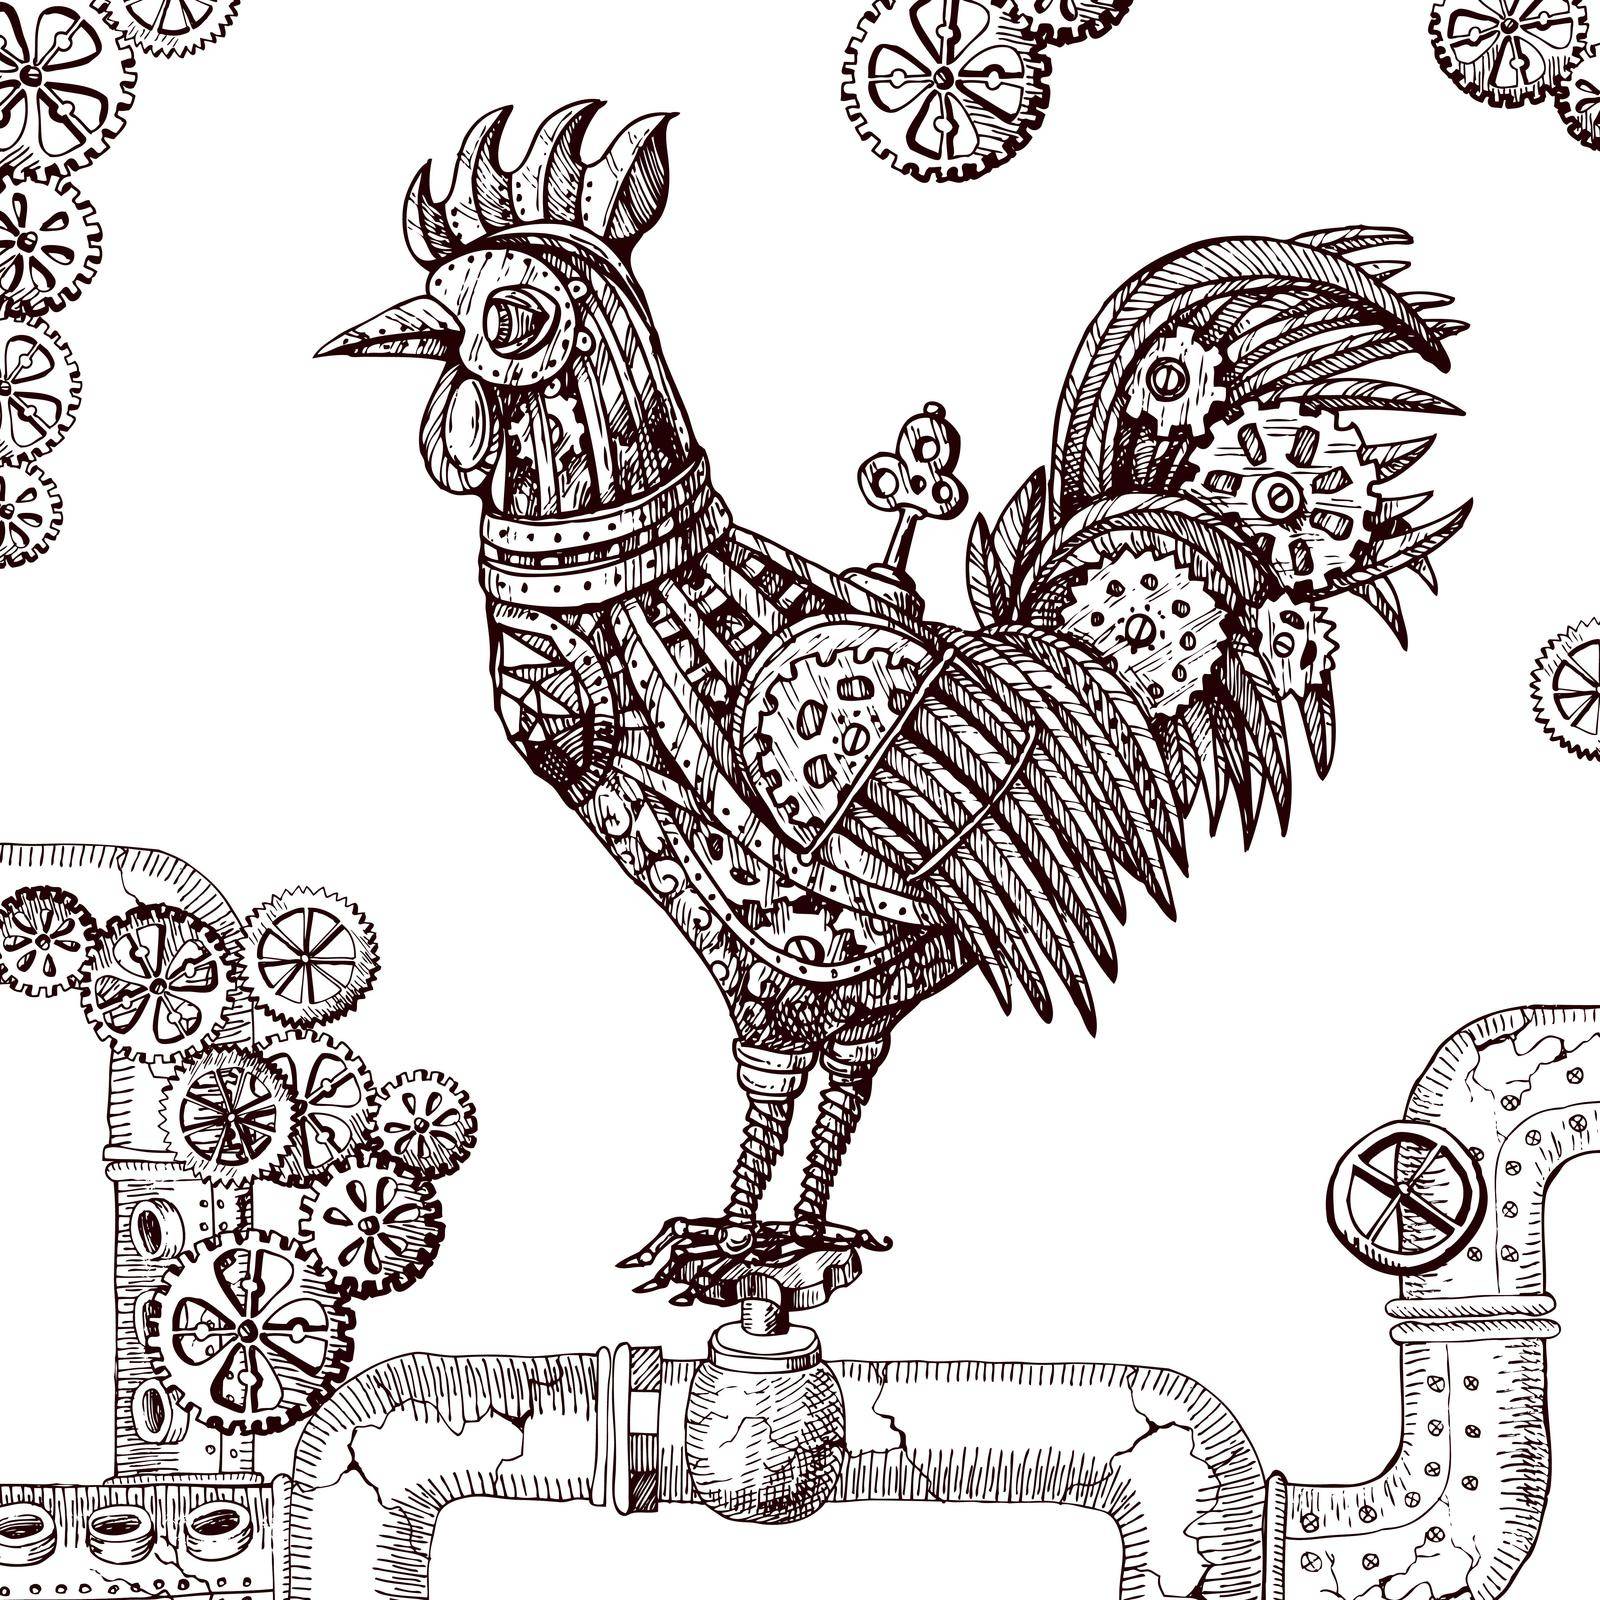 Steampunk card. Retro illustration with mechanical cock. Vintage invitation.Gear rooster in a sketch style. Stylized vector illustration. Mechanical creature for tattoo design. Symbol of year 2017